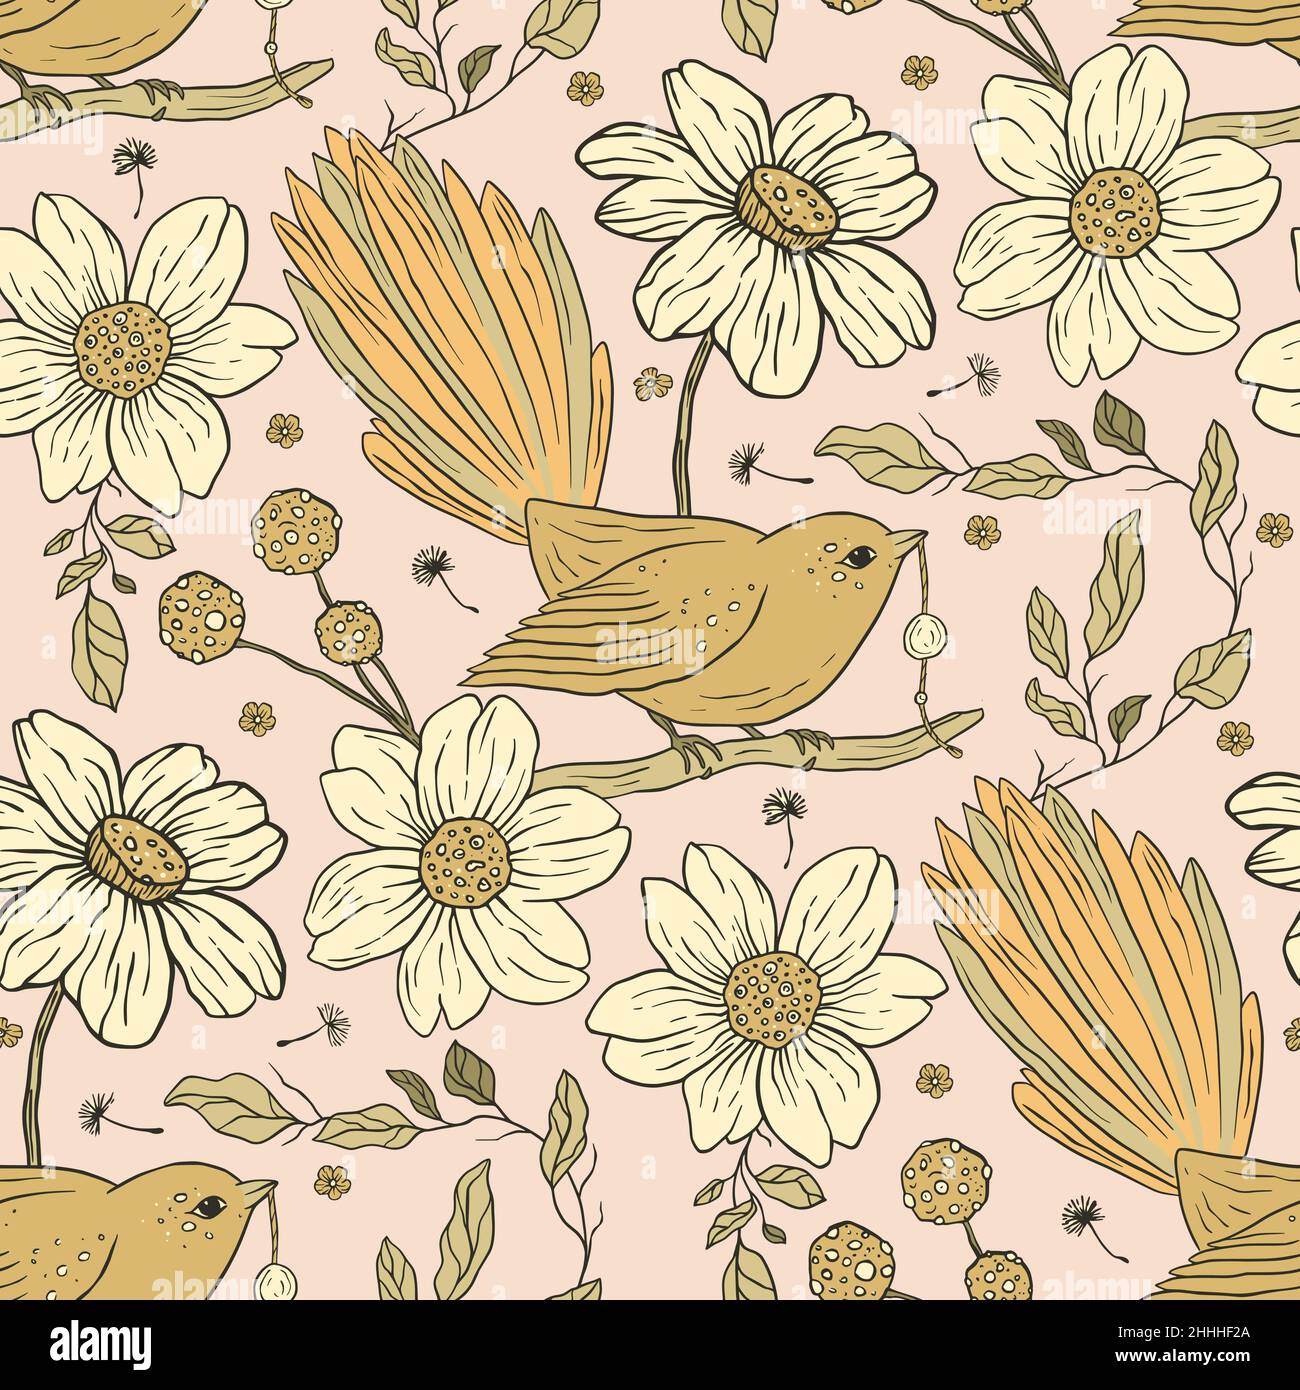 Vintage aesthetic bird boho floral seamless pattern with daisy flower Stock Vector